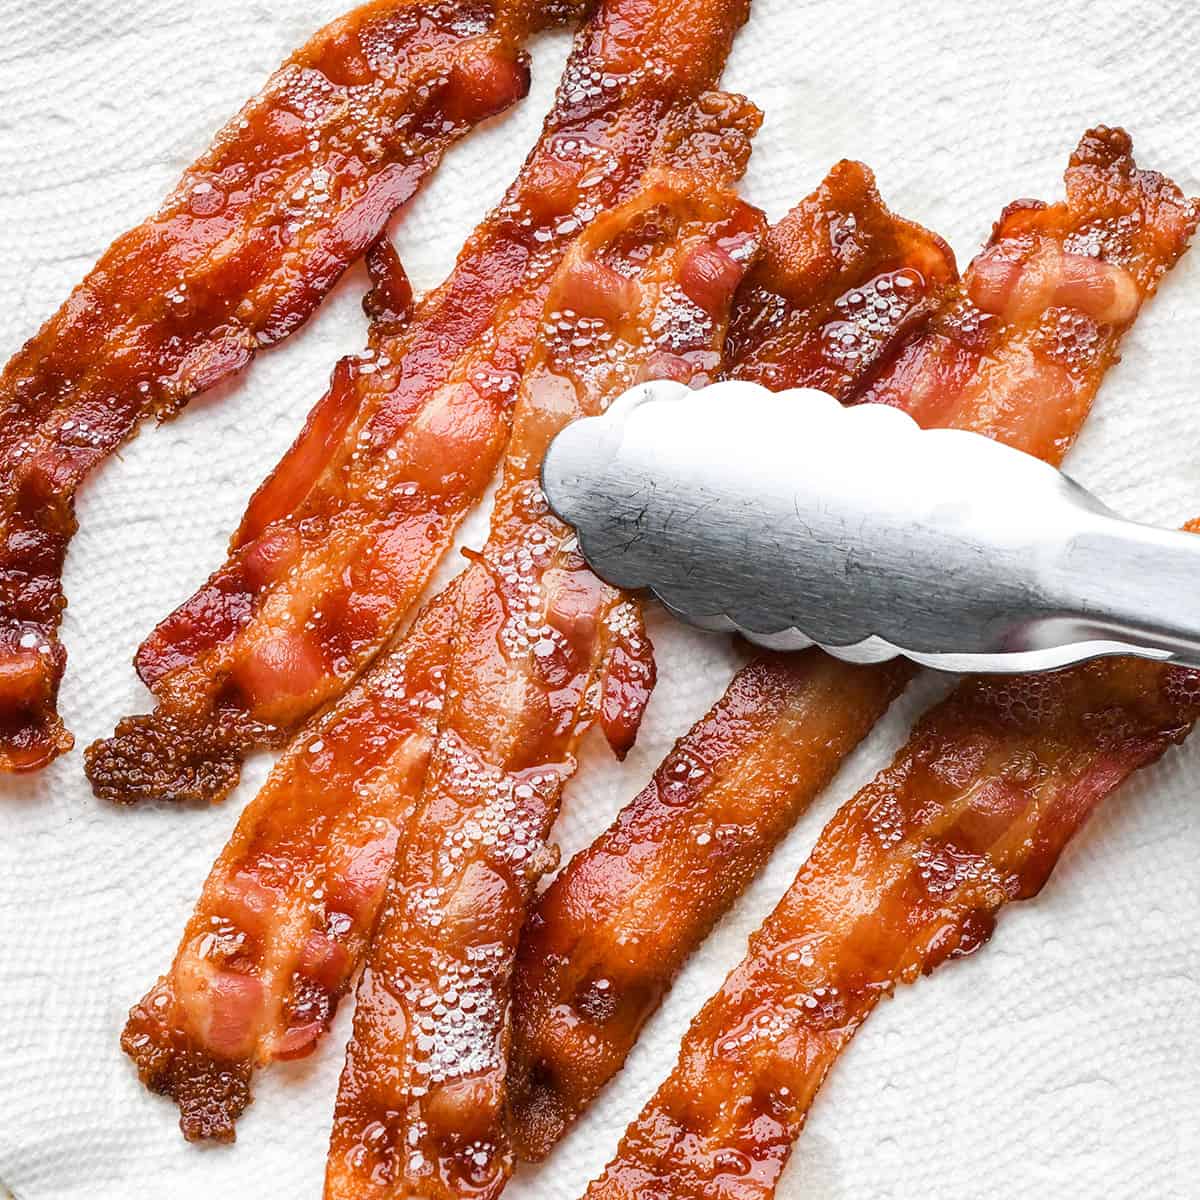 tongs holding Oven Baked Bacon